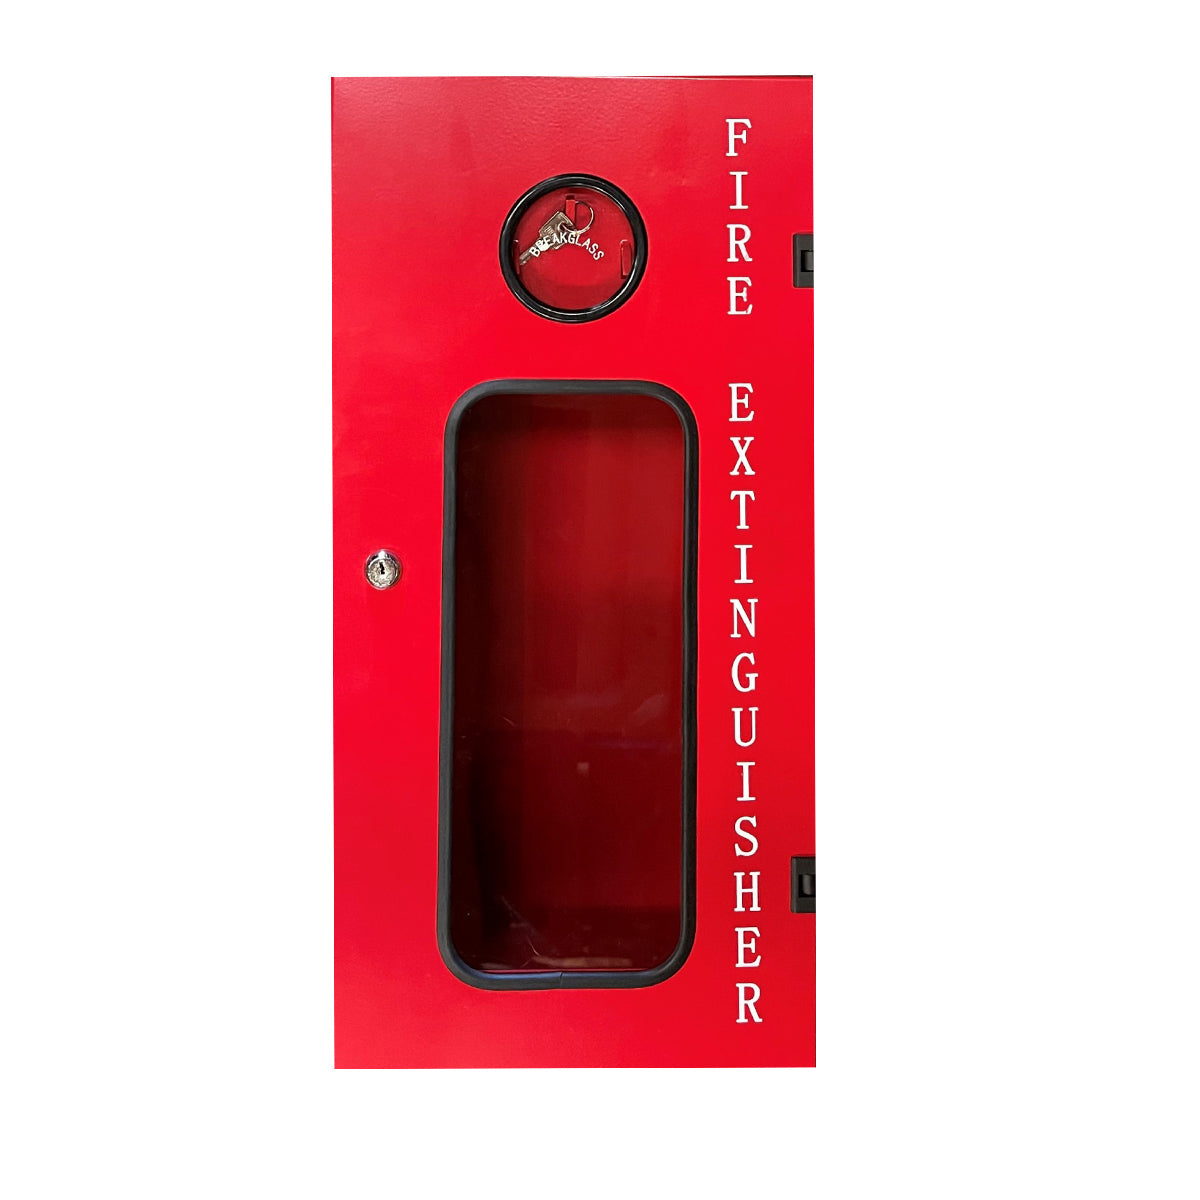 Medium Metal Fire Extinguisher Cabinet - Premium Cabinets, Stands & Covers from Firebox - Shop now at Firebox Australia